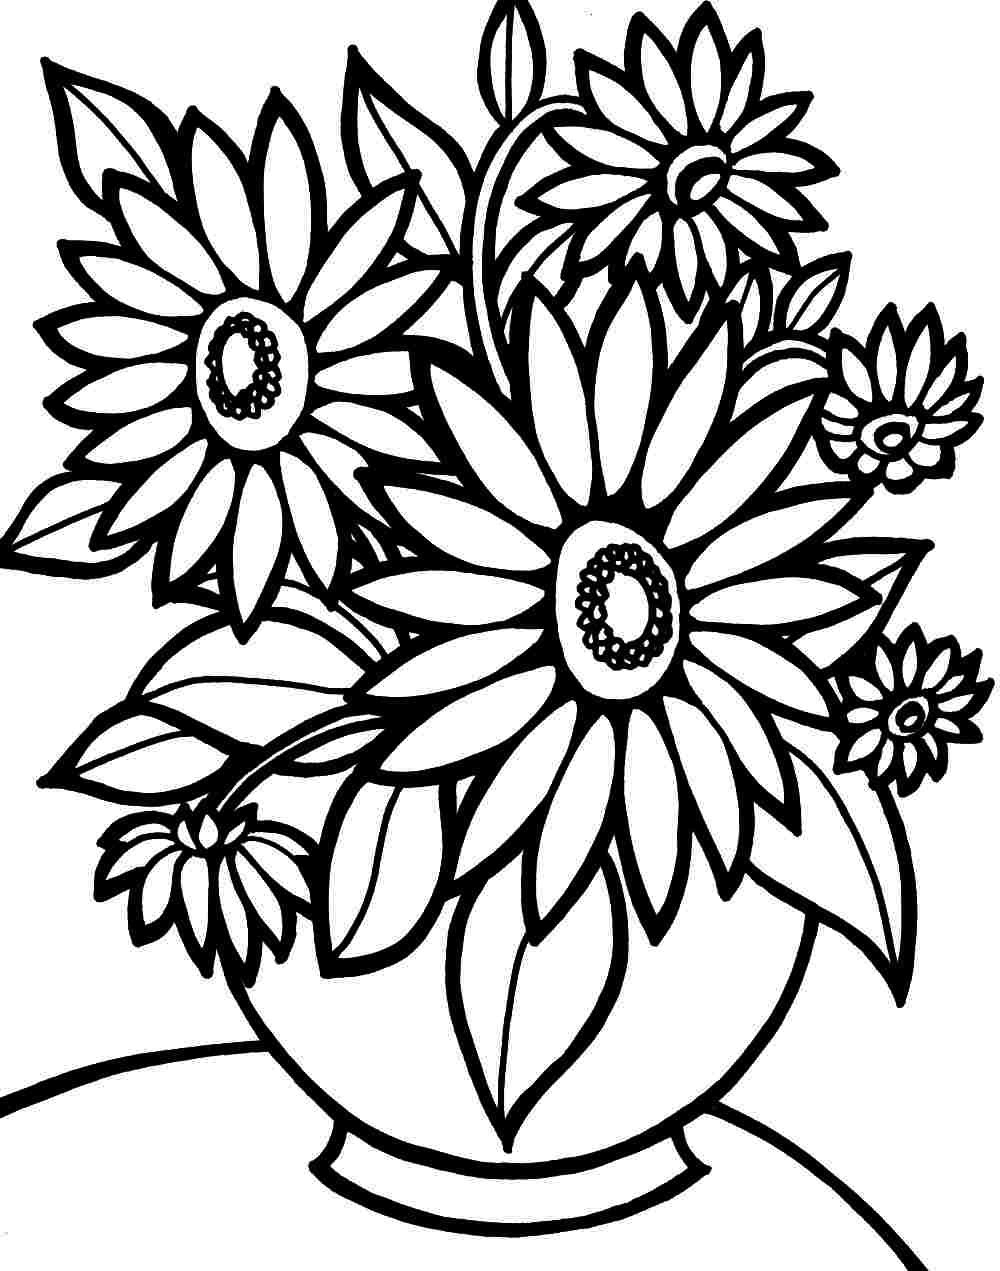 Free Printable Flower Coloring Pages For Kids   Best Coloring ...